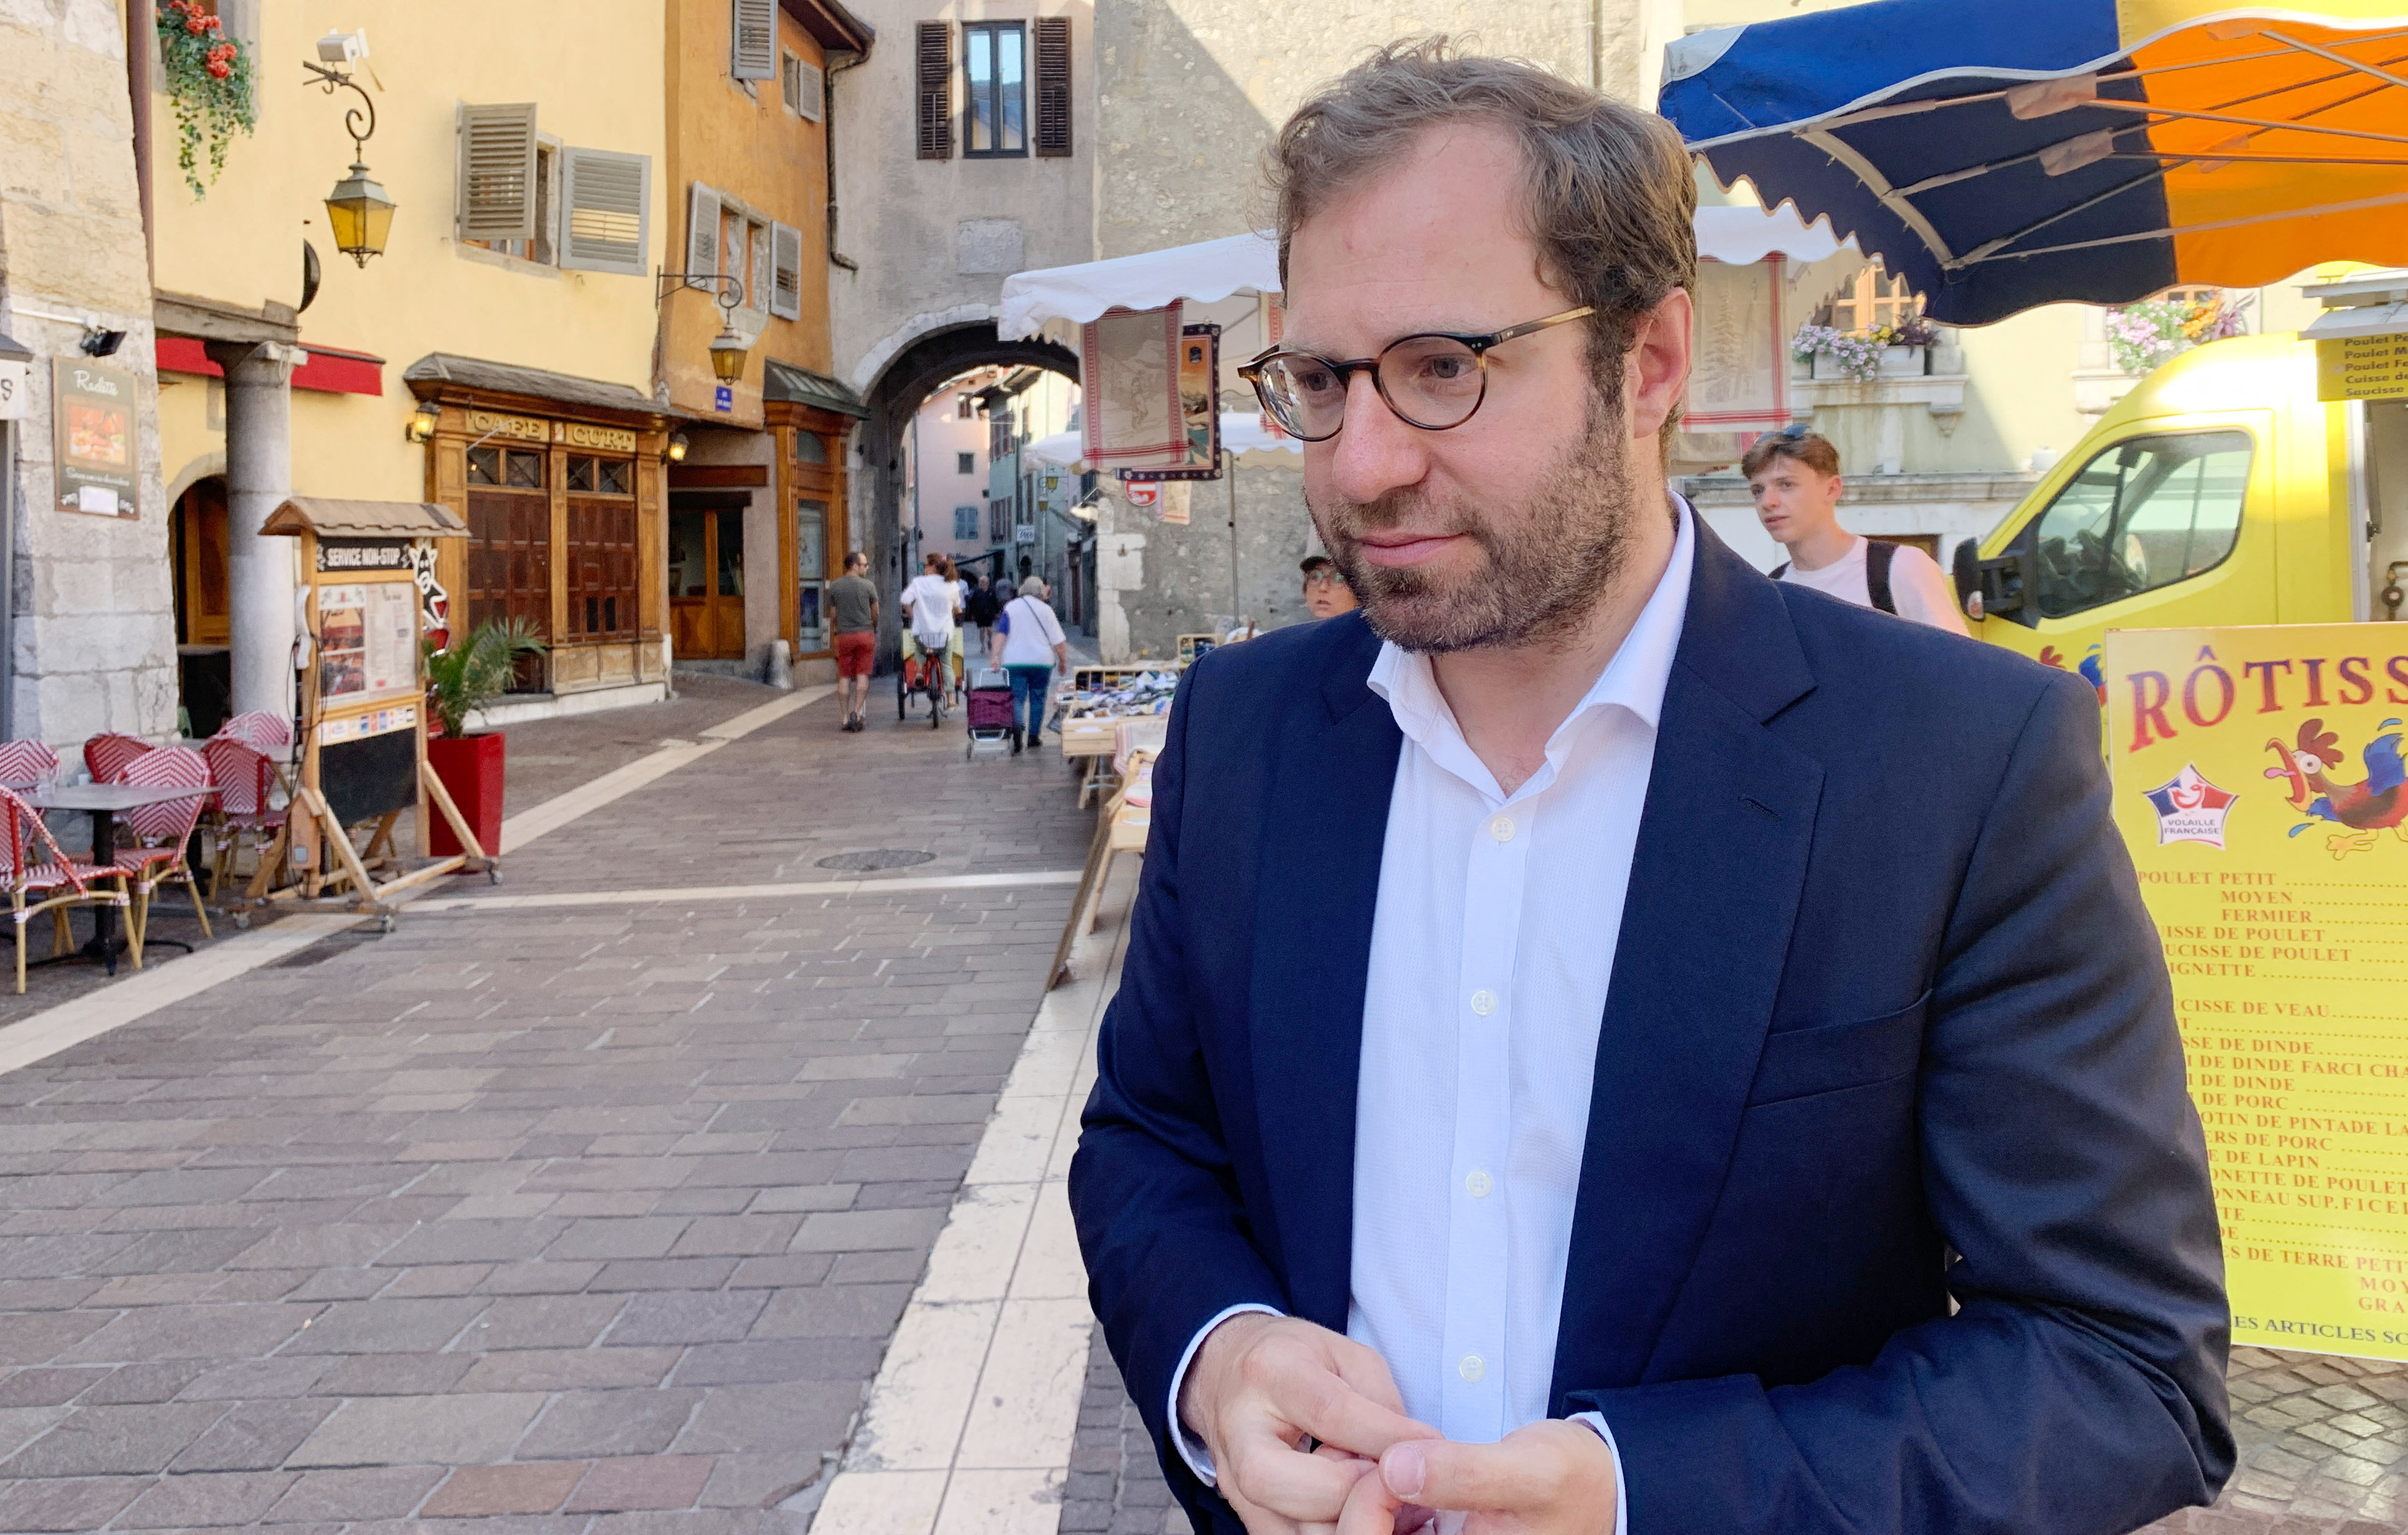 Armand, Renaissance candidate for the second constituency of Haute-Savoie, is seen during his campaign in Annecy